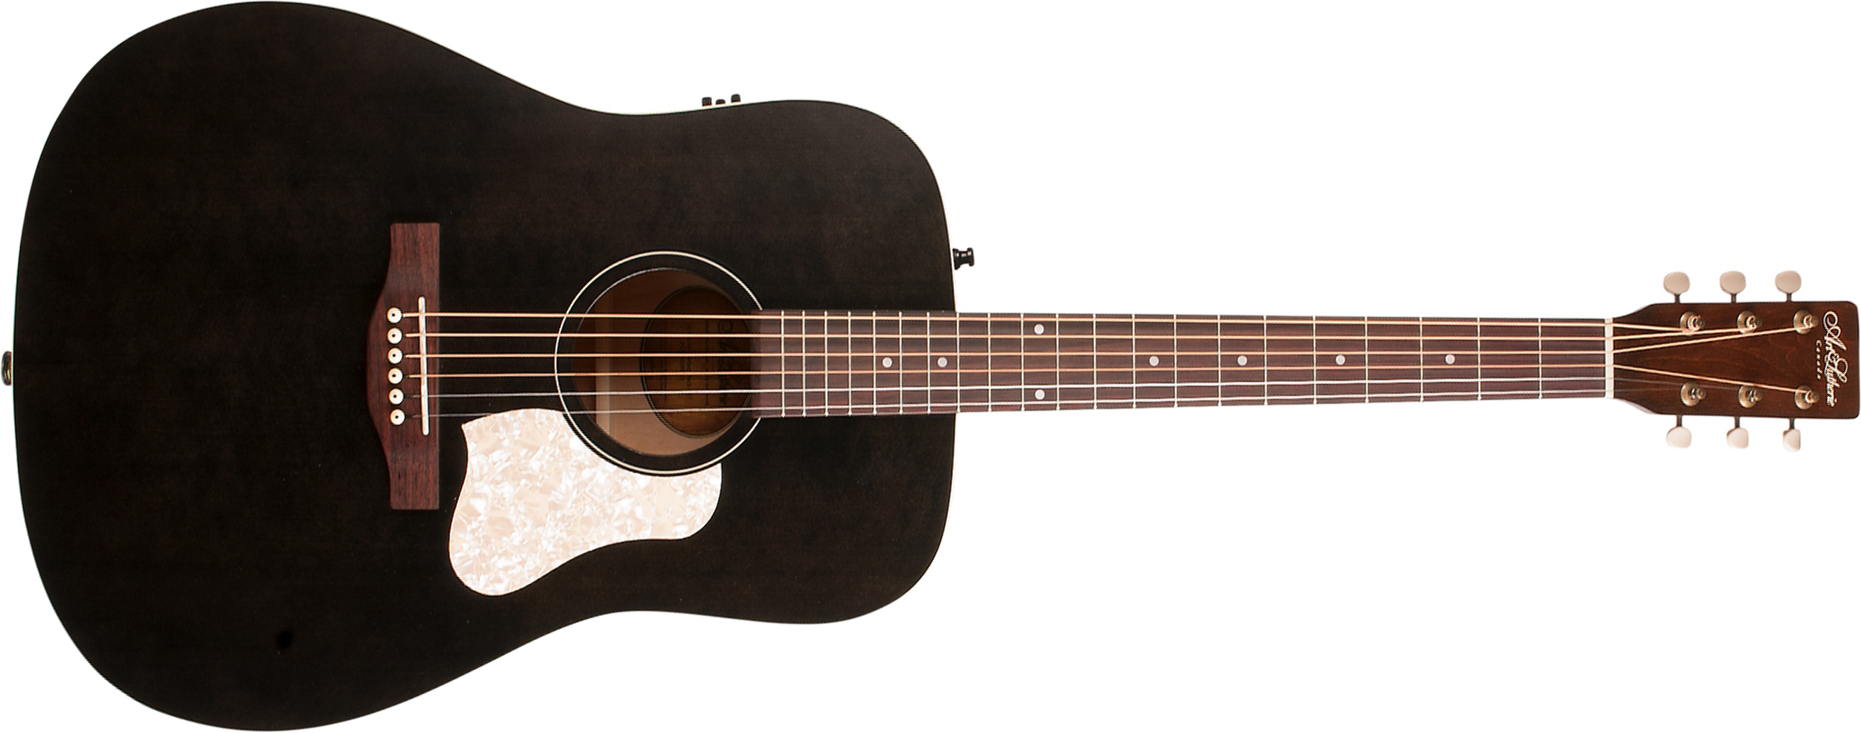 Art Et Lutherie Americana Presys Ii Dreadnought Cedre Merisier Rw - Faded Black - Guitare Electro Acoustique - Main picture